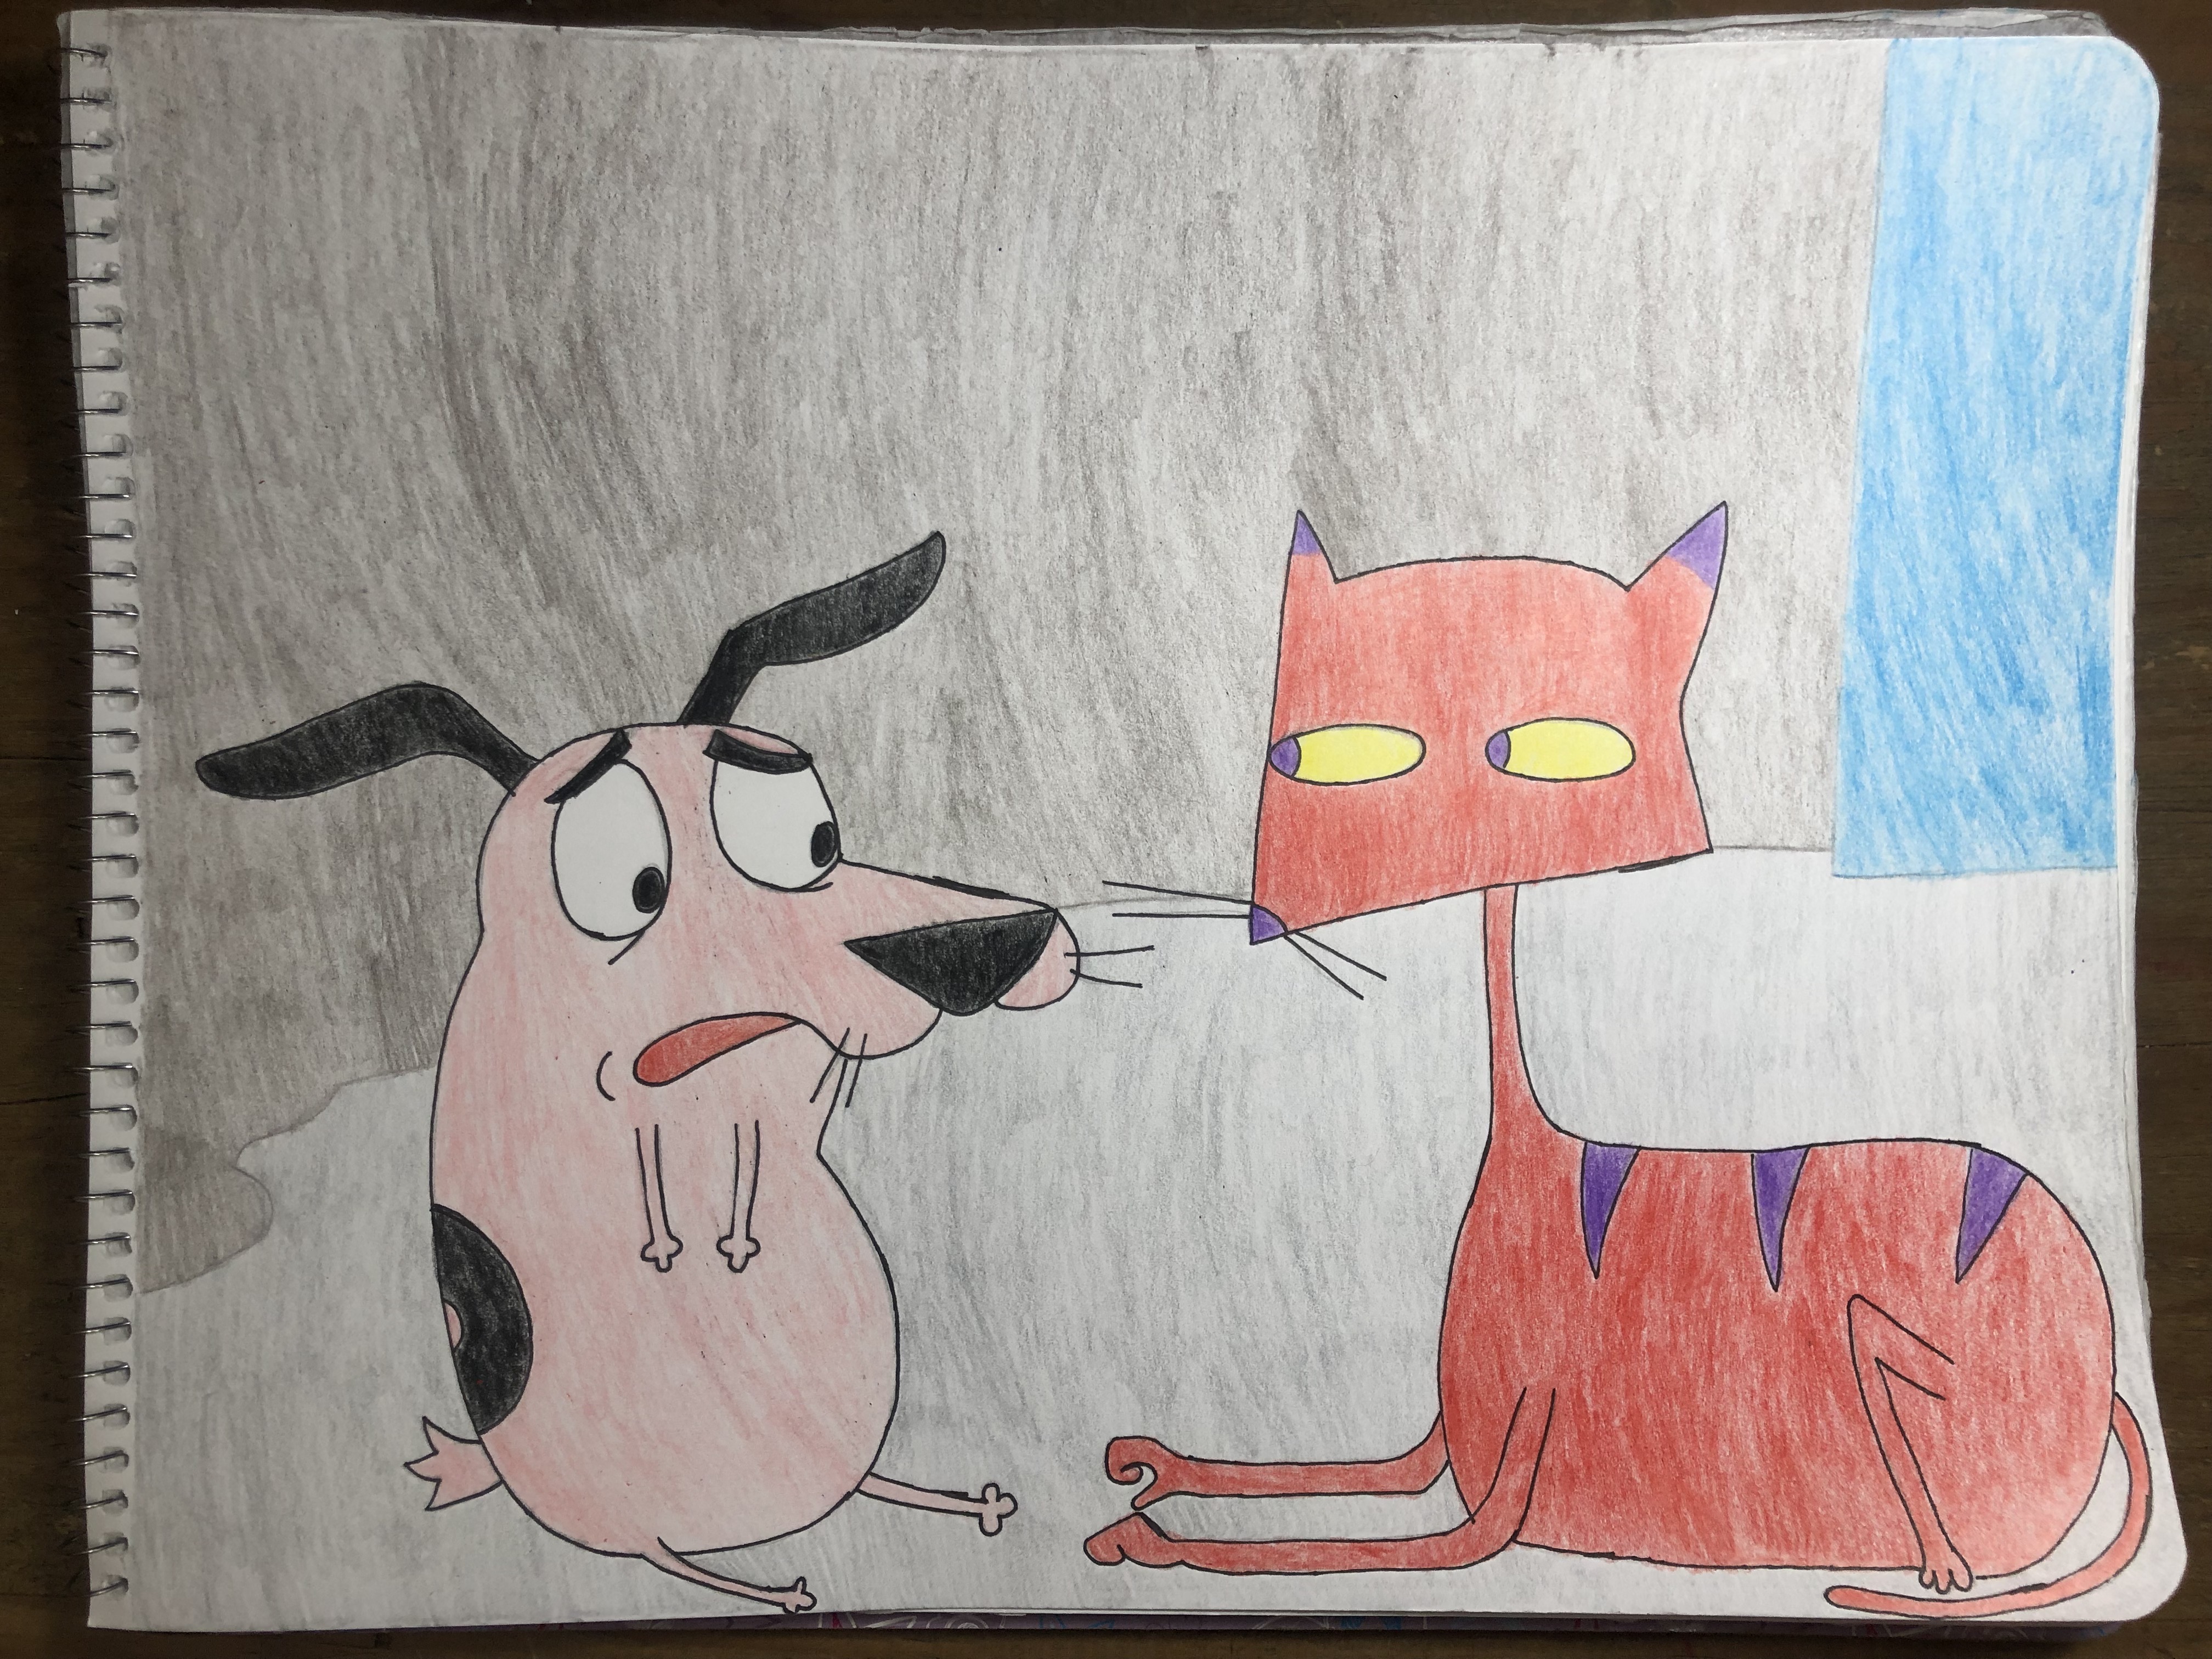 Courage The Cowardly Dog (Cartoon Network) by Aleler94 on DeviantArt